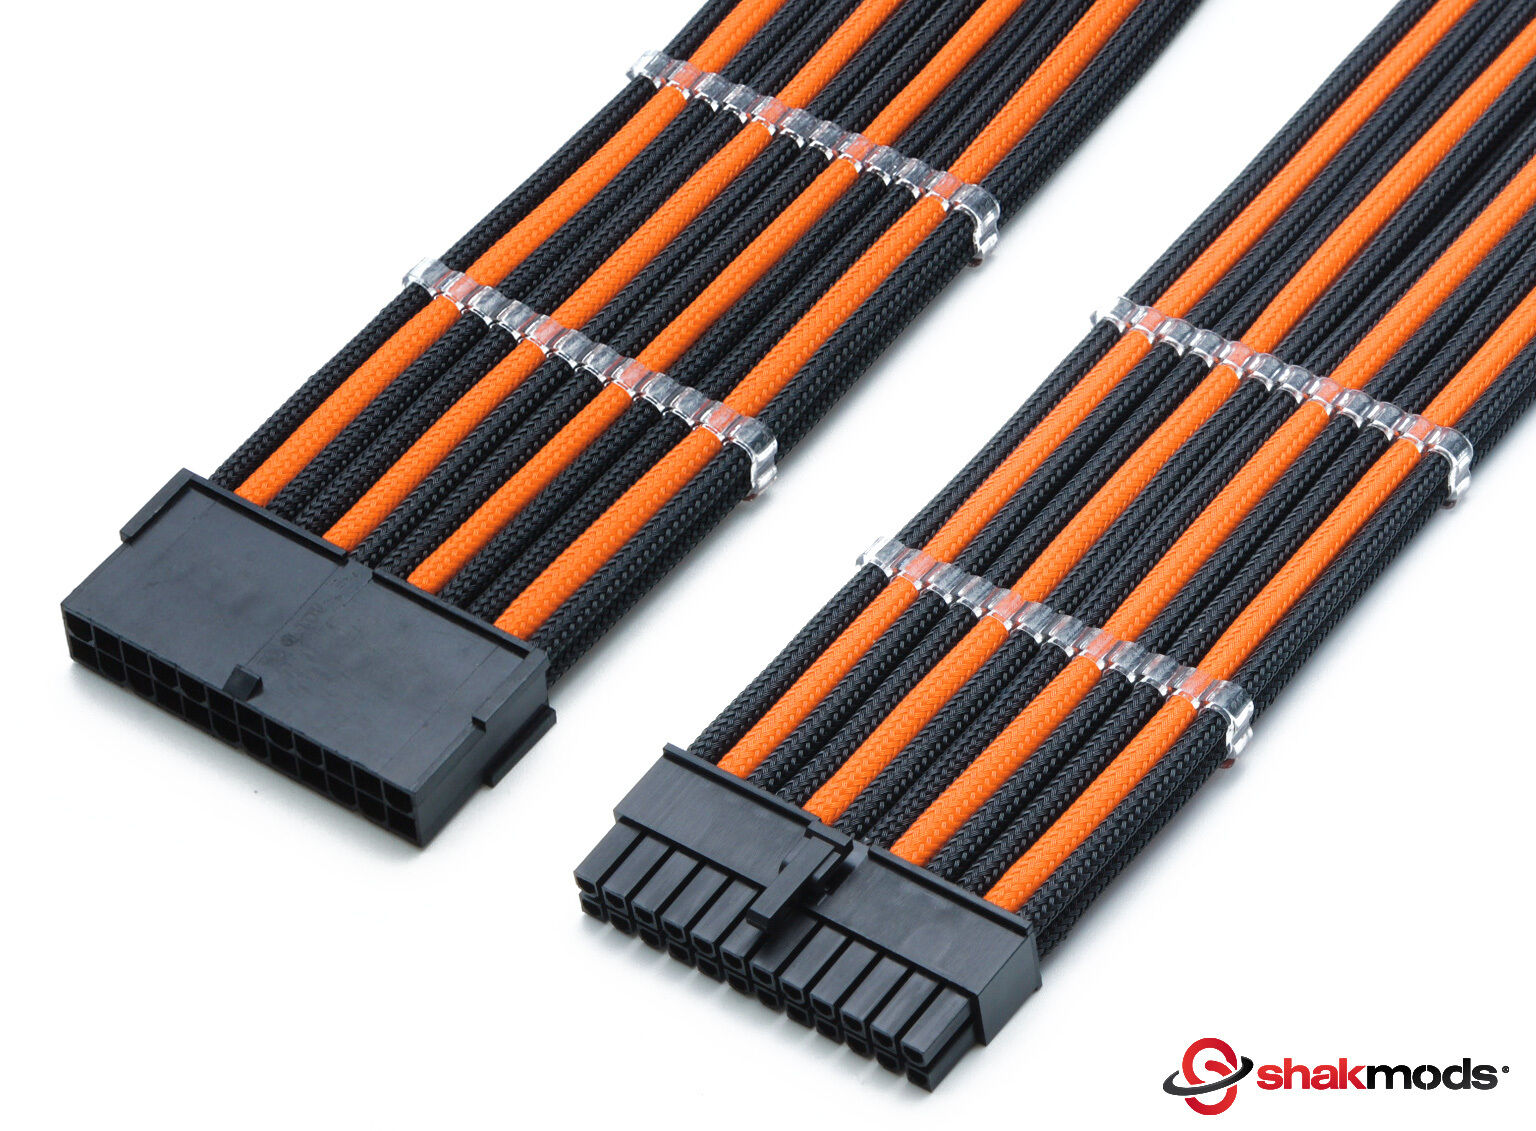 Shakmods 24pin ATX Mobo 30cm Black & Orange Sleeved Extension + 2 Cable Combs